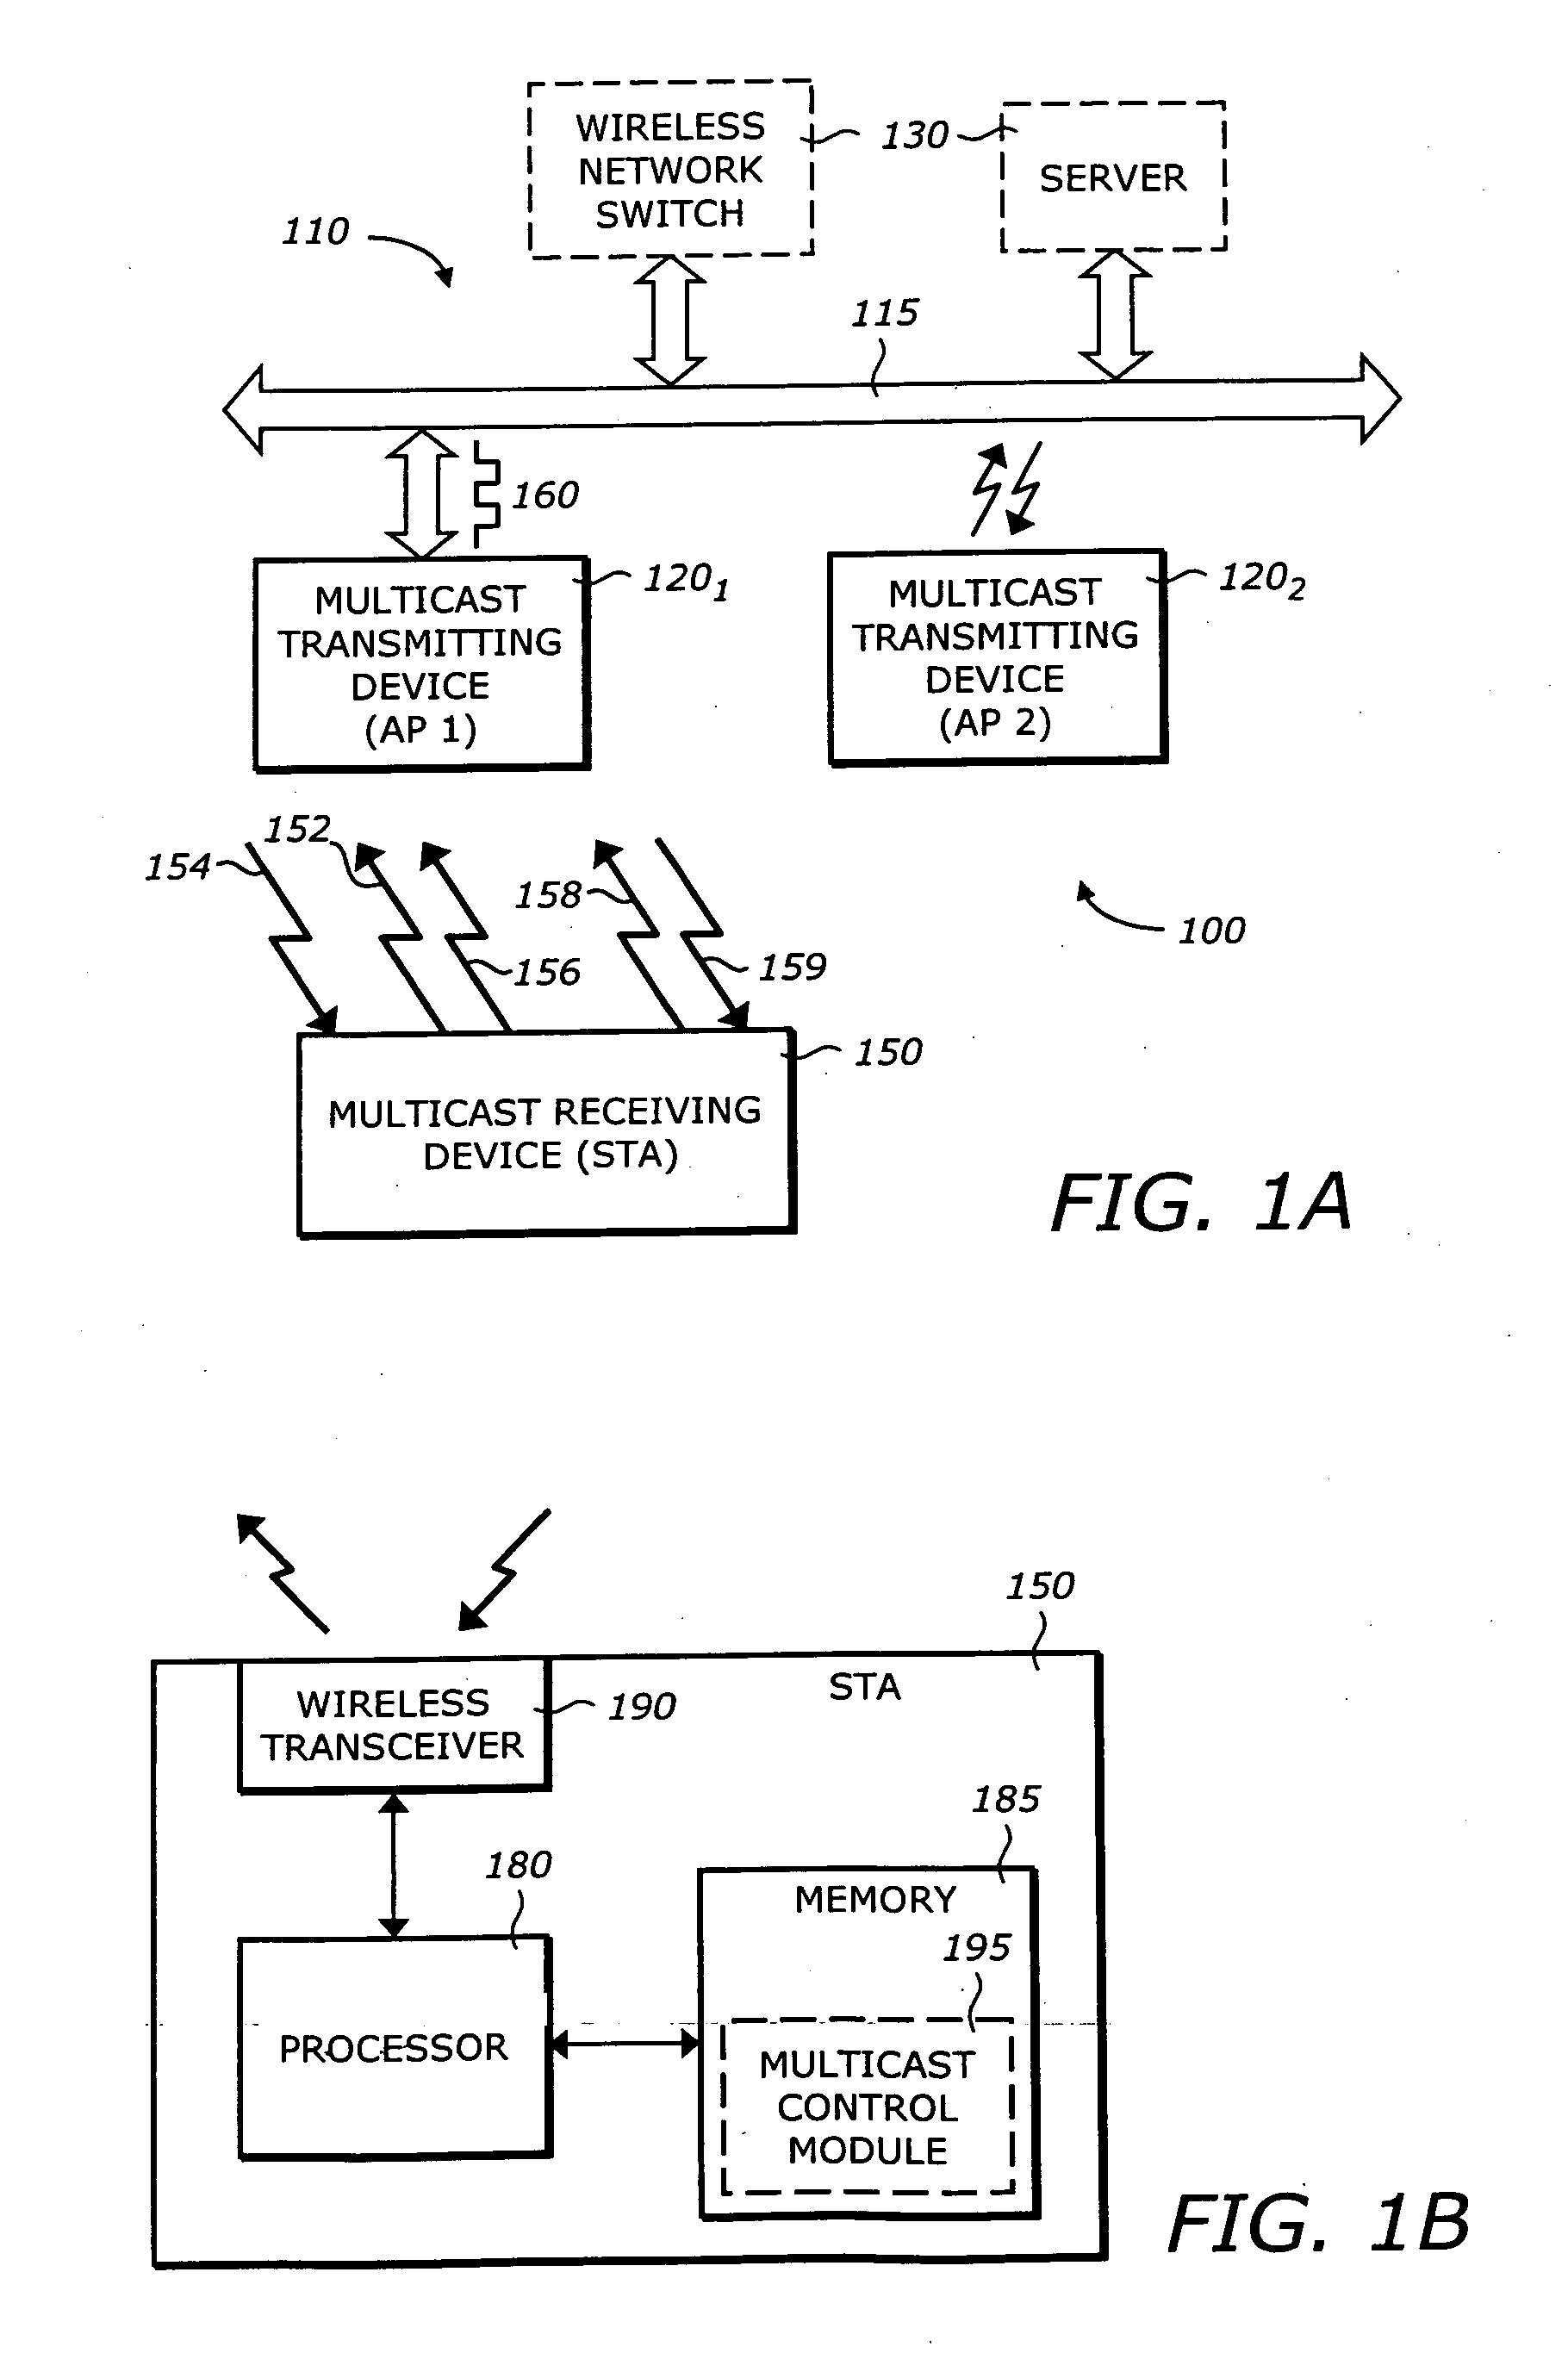 System and method for reliable multicast transmissions over shared wireless media for spectrum efficiency and battery power conservation